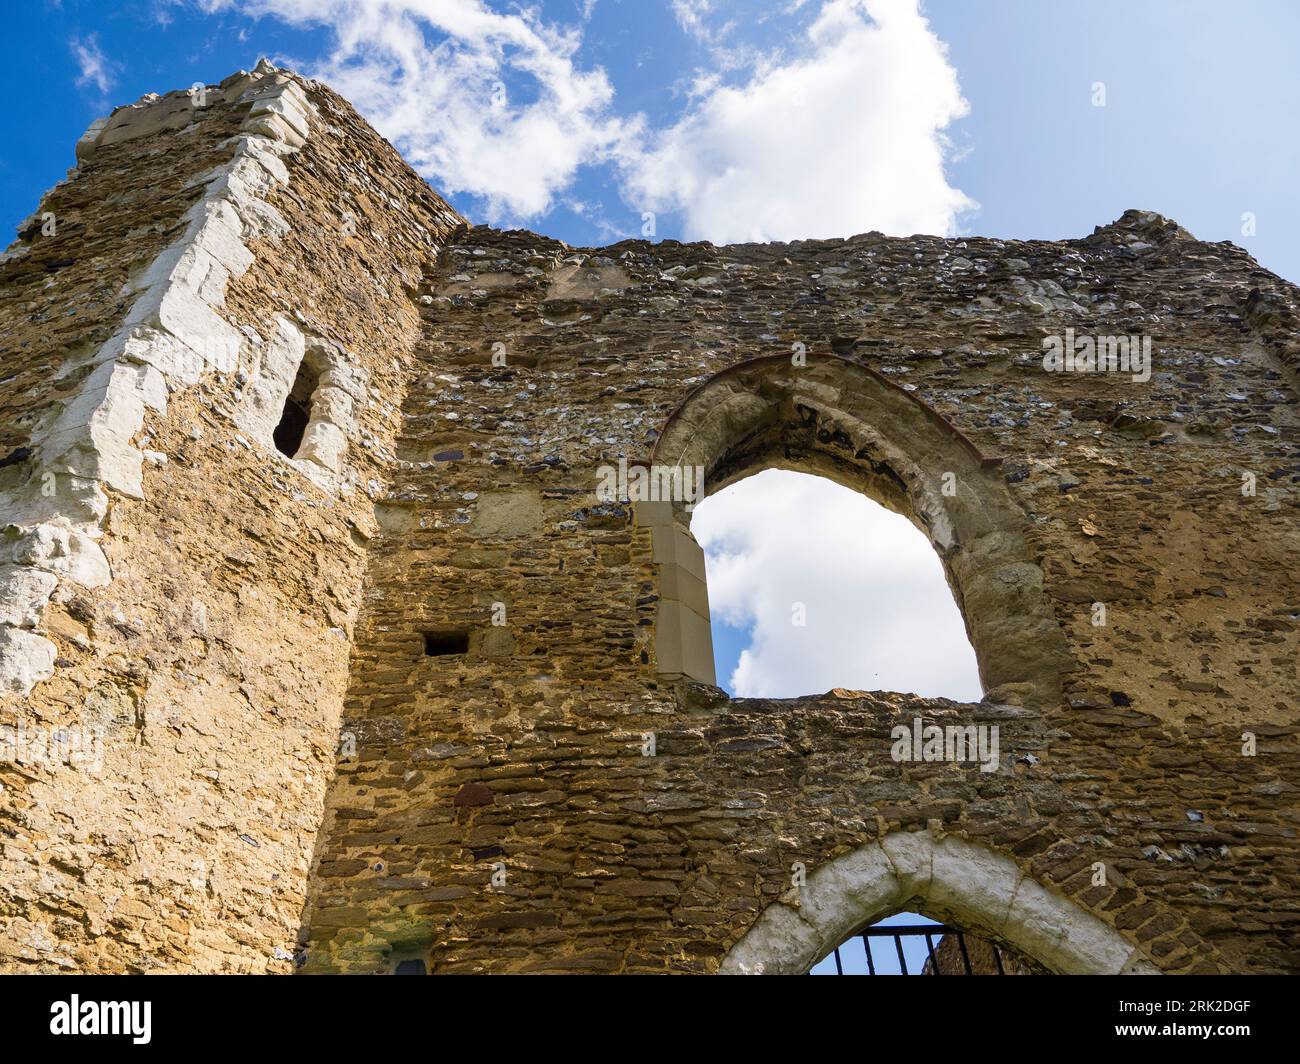 Ruined Chapel, St Catherine Hill and Chapel, Guildford, Surrey, England, Vereinigtes Königreich, GB. Stockfoto